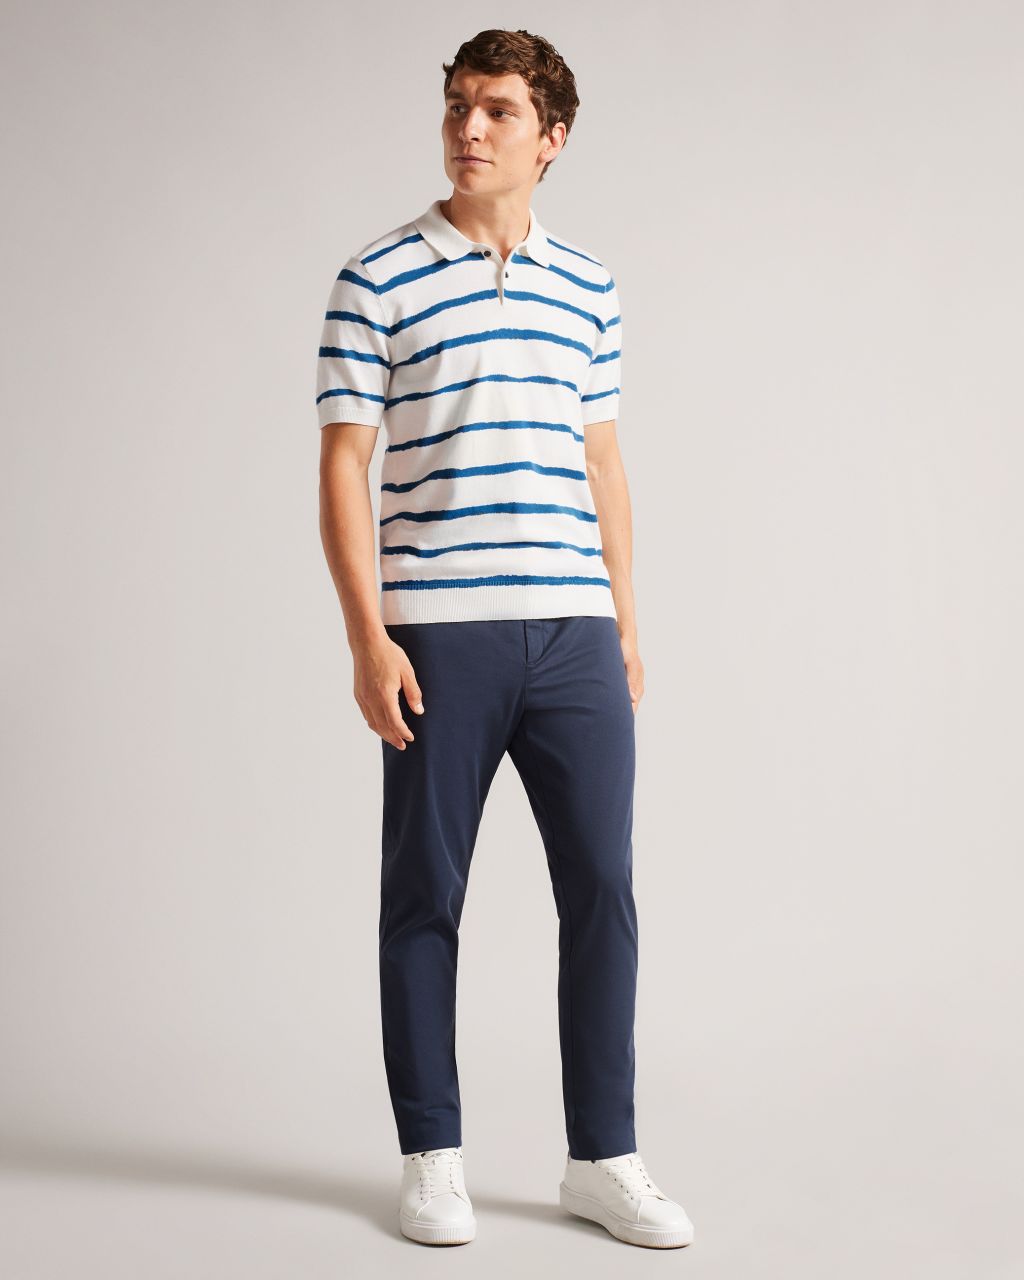 Ted Baker Men's Painted Stripe Knitted Polo Shirt in Ecru, Cromer, Cotton